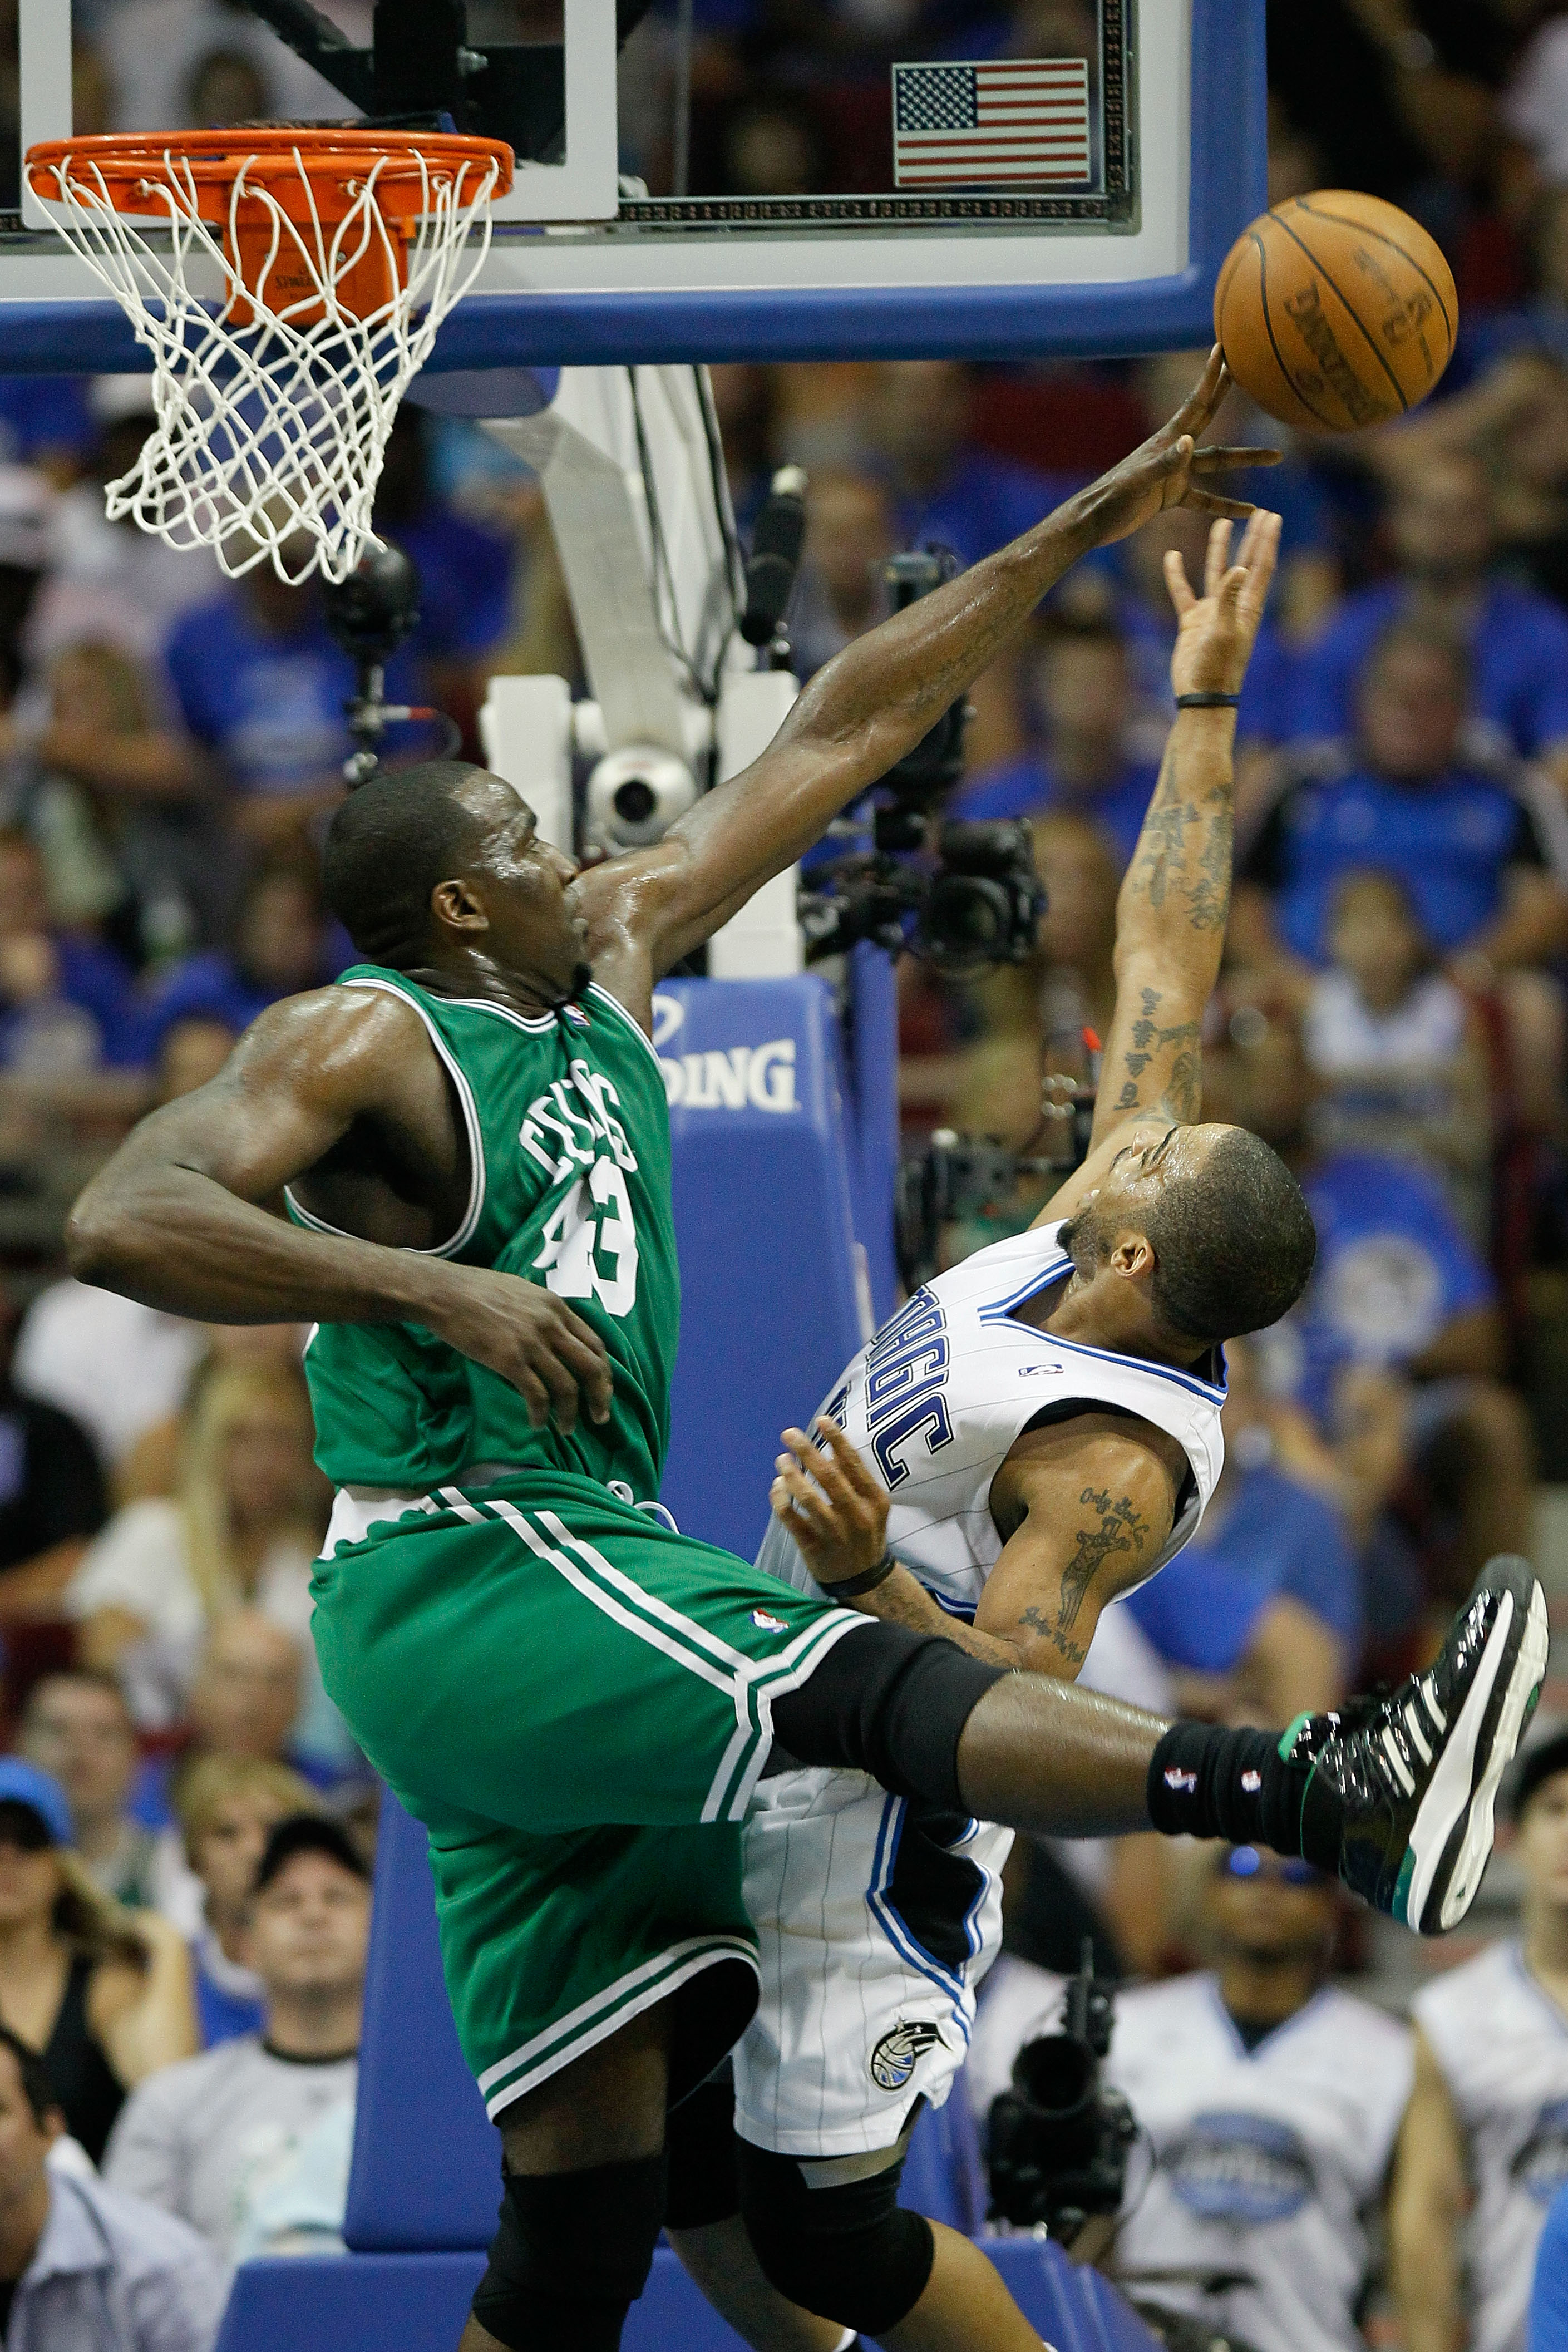 Jermaine O'Neal hopes to get rolling after slow start with Celtics